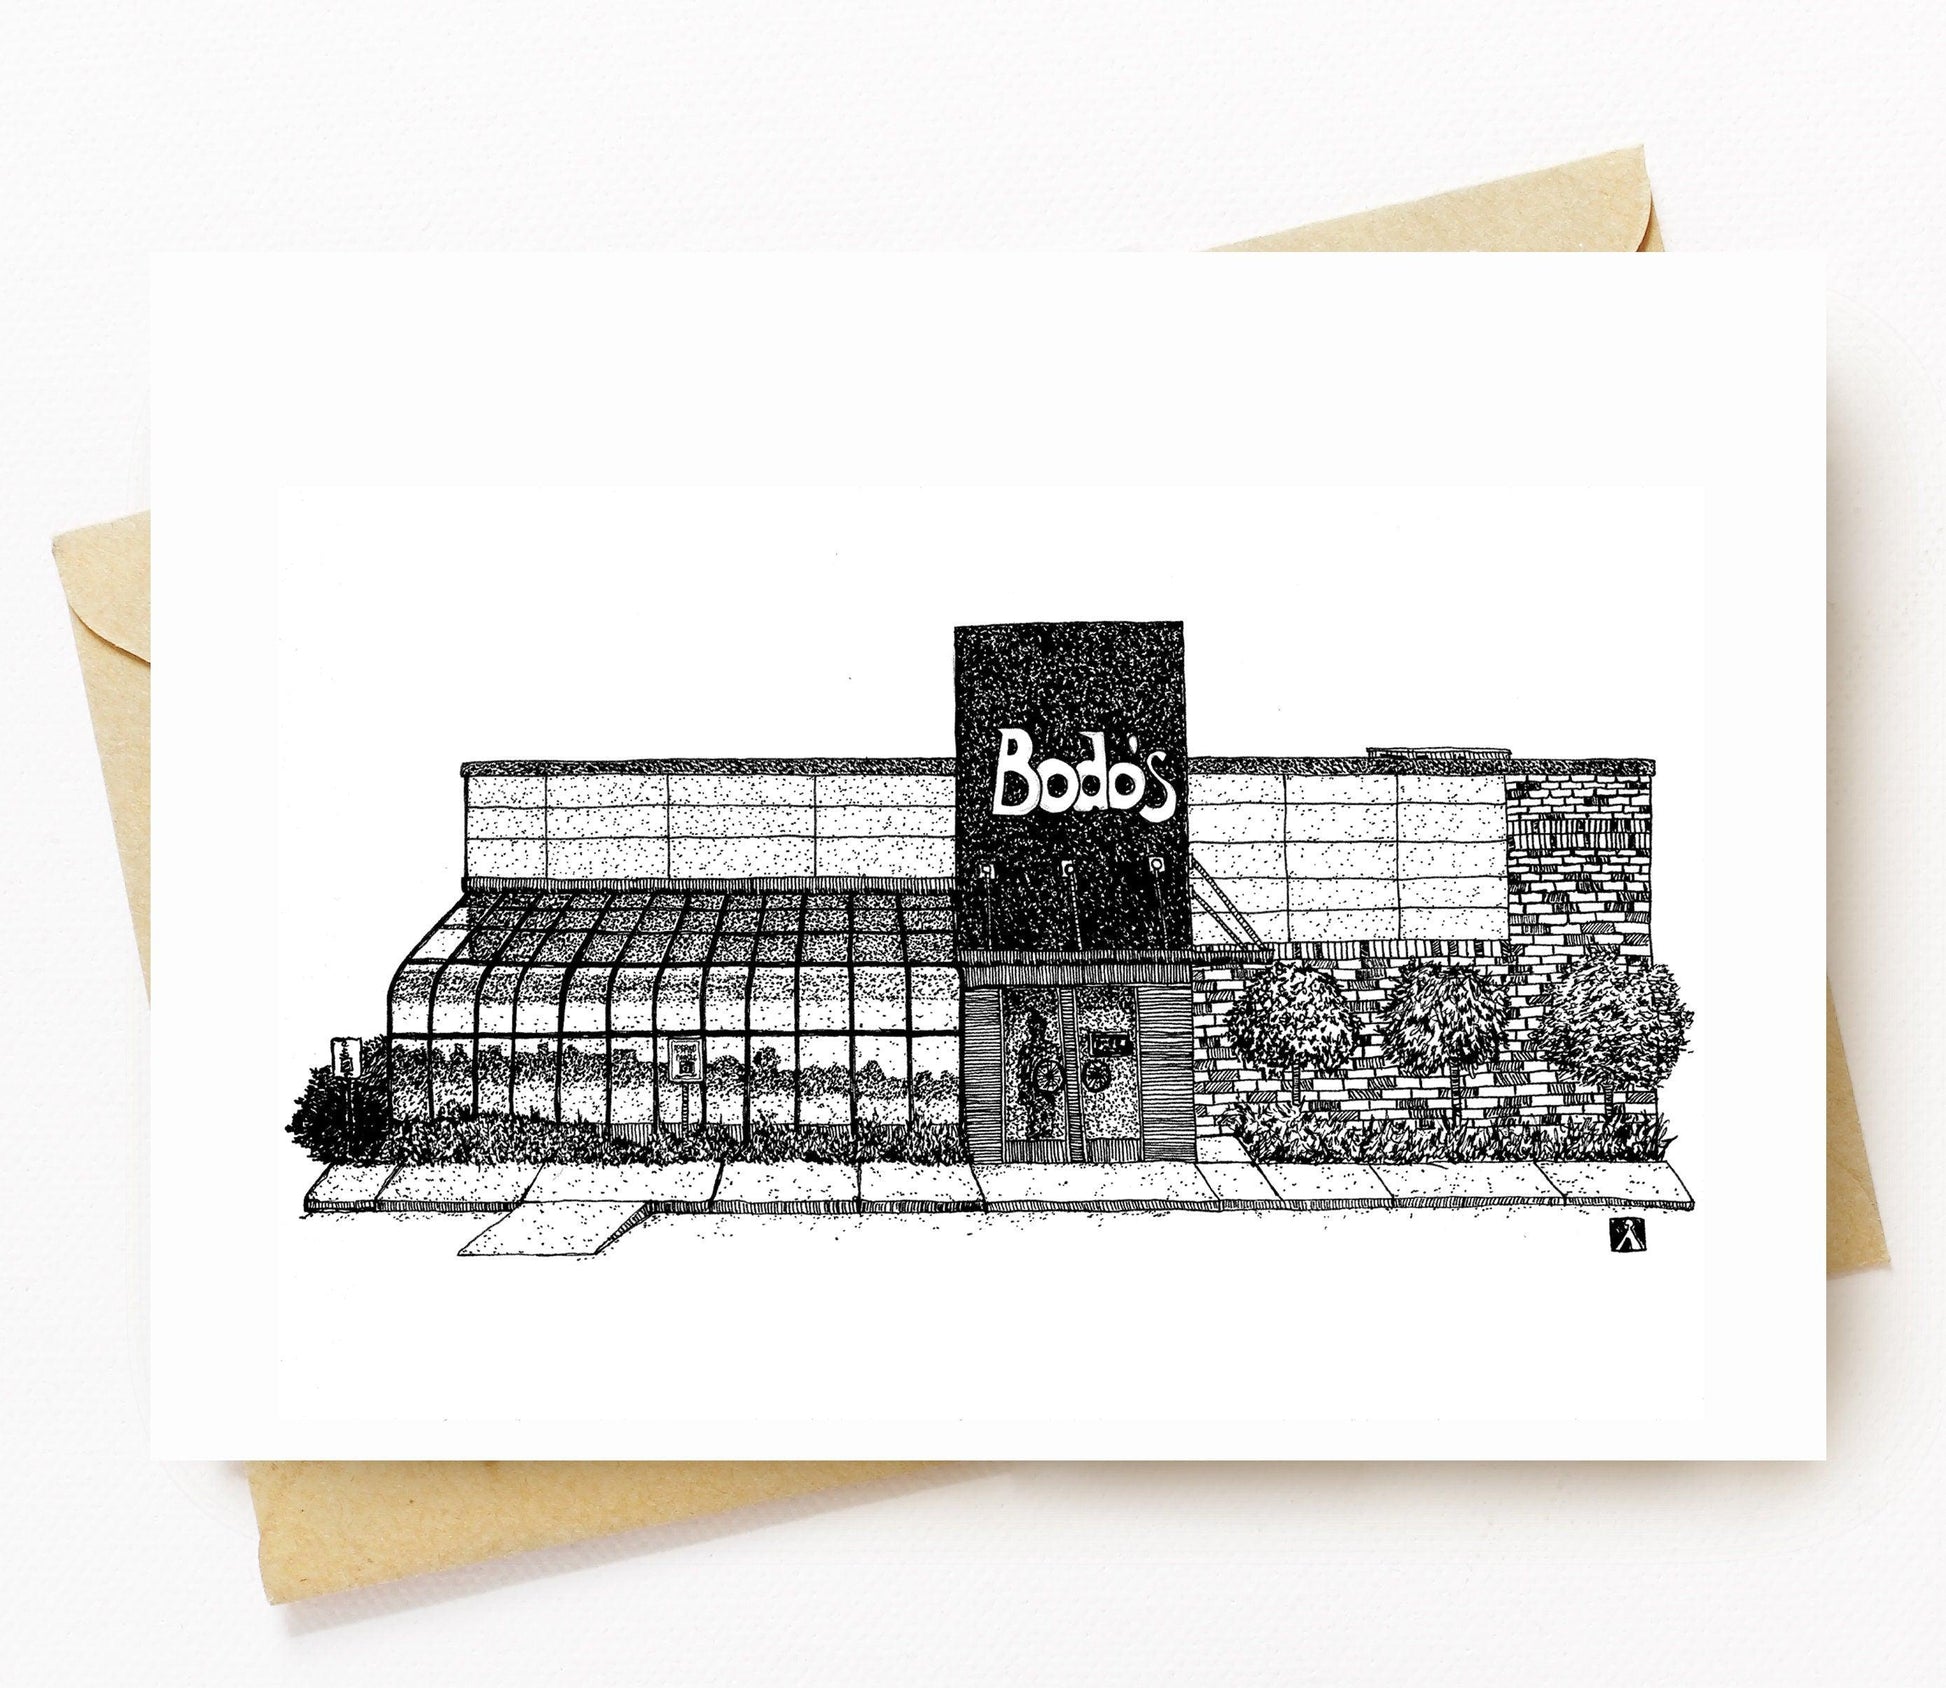 BellavanceInk: Greeting Card With A Pen & Ink Drawing Of Bodos Bagels Restaurant In Charlottesville 5 x 7 Inches - BellavanceInk